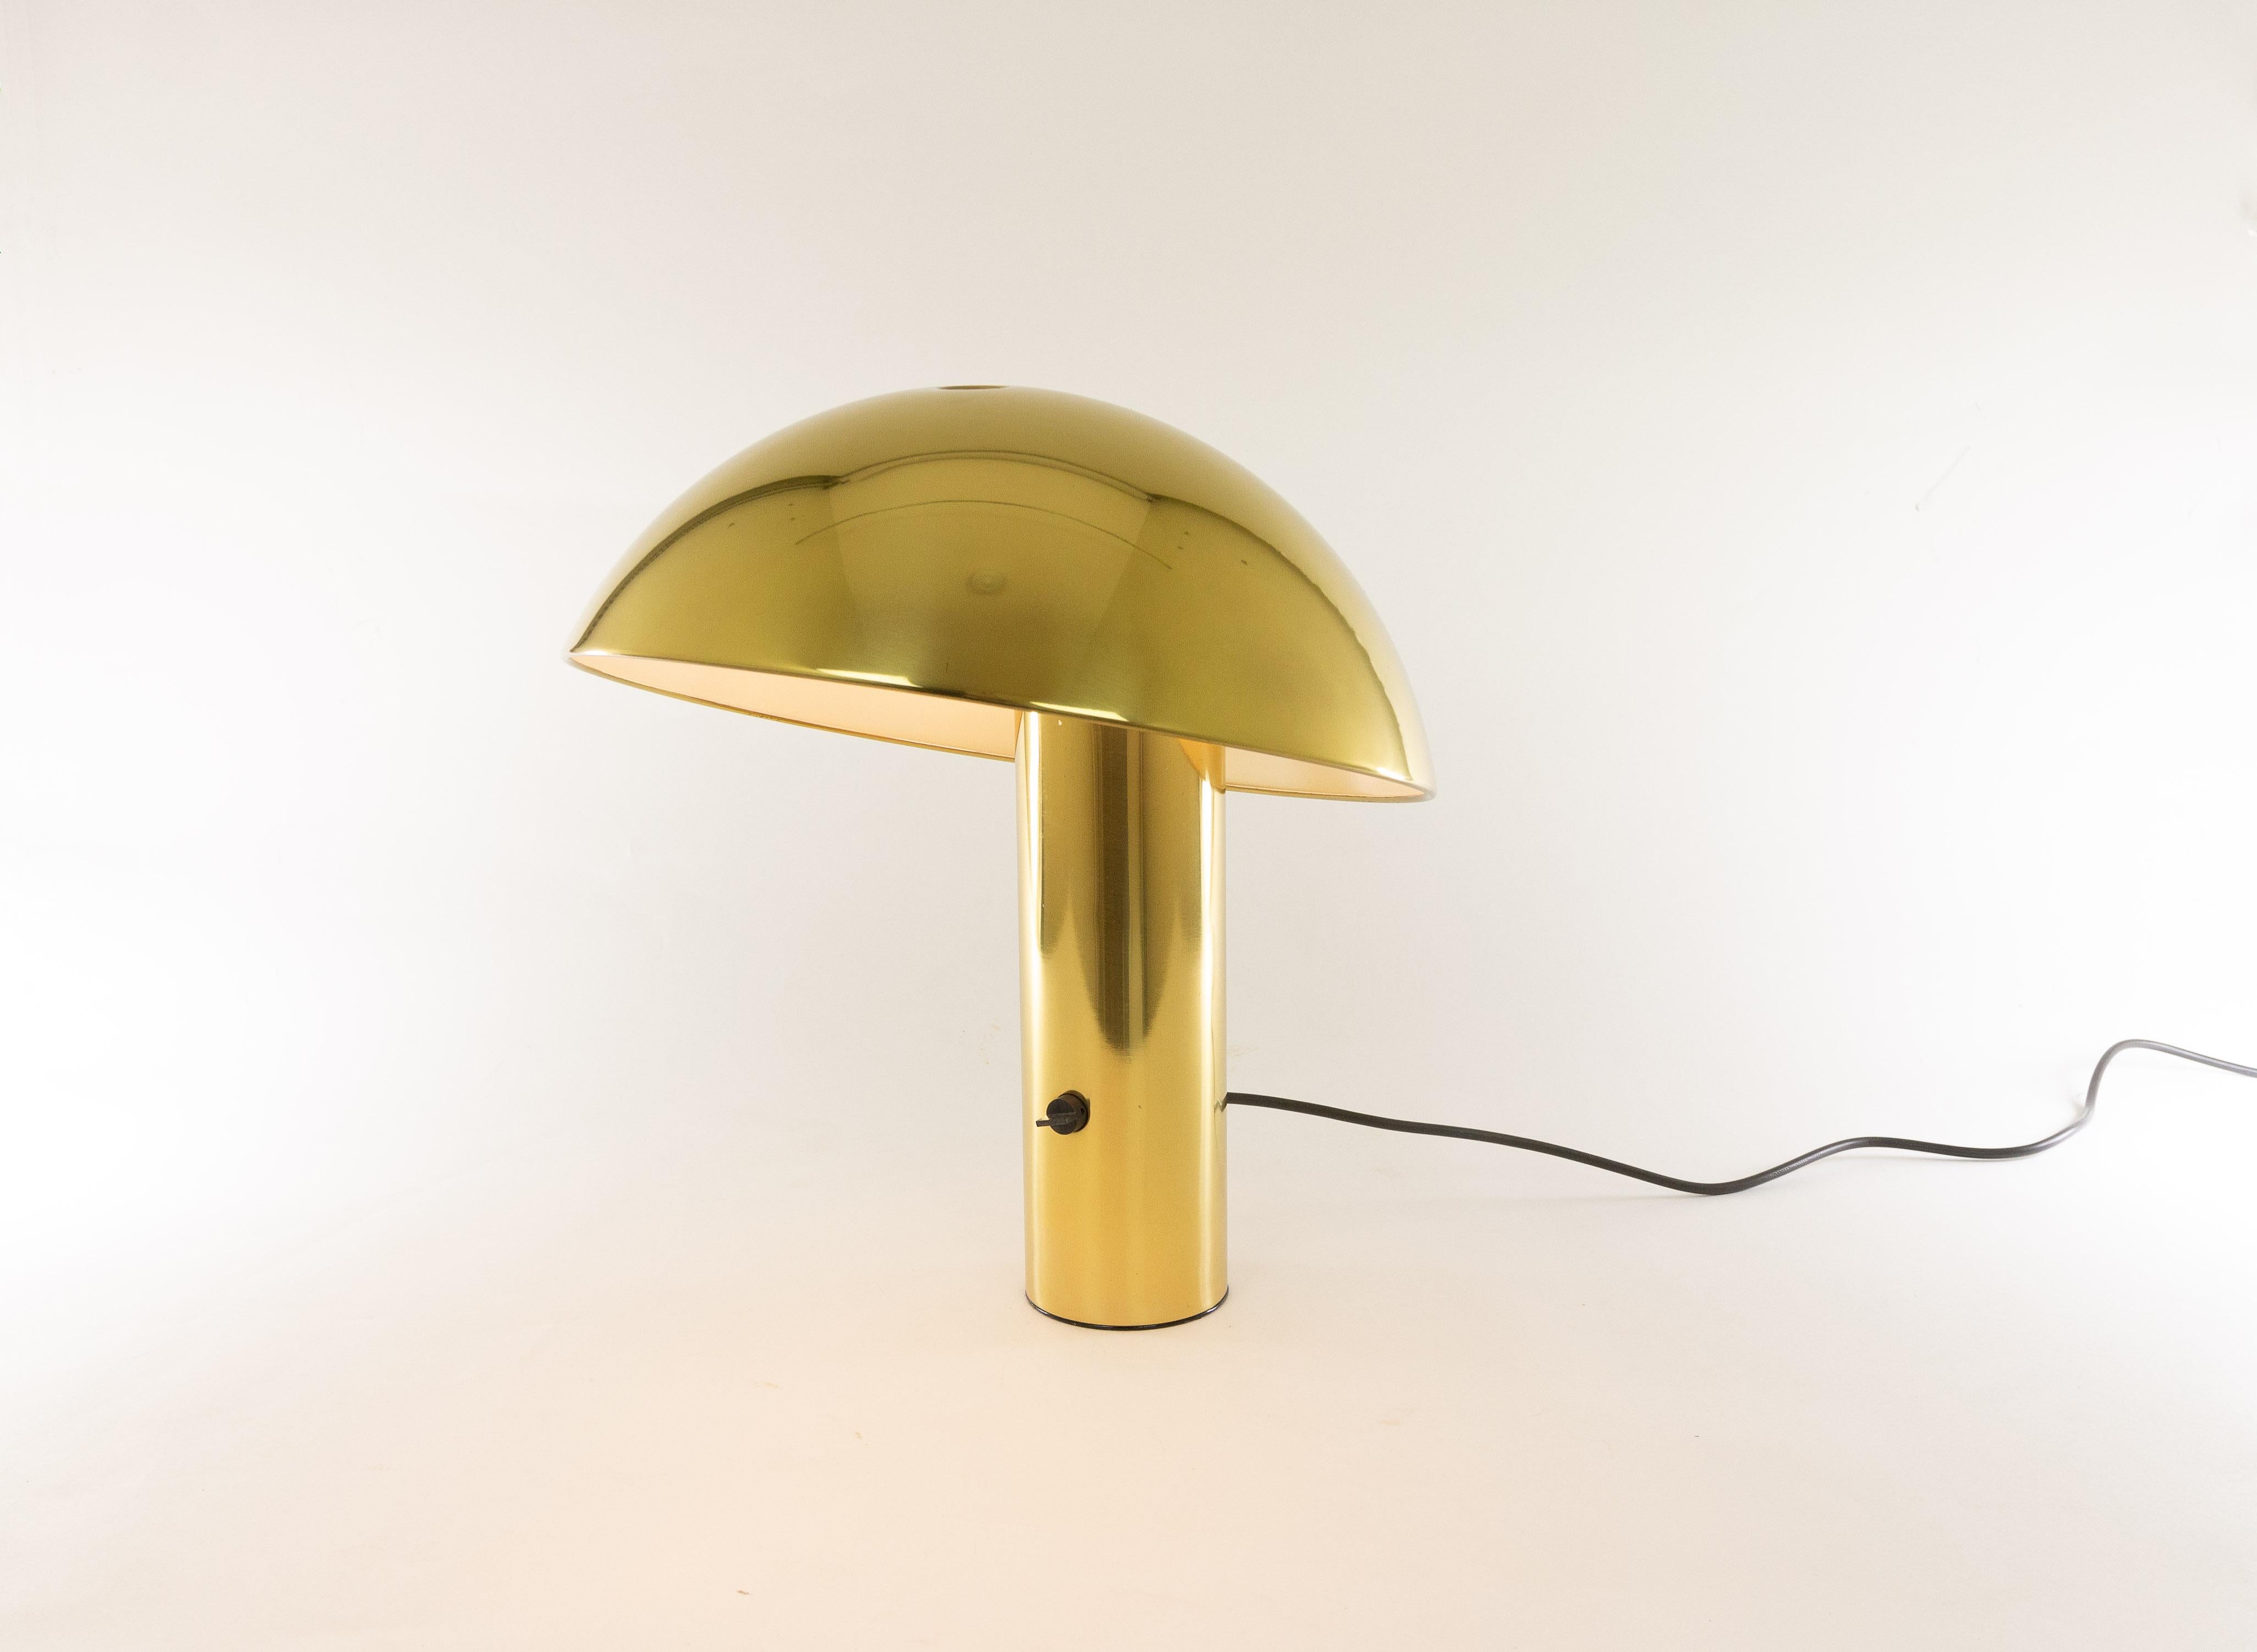 Brass table lamp, model Vaga, designed by Franco Mirenzi in 1978. The lamp is produced by Valenti Luce.

The relatively heavy base provides a solid balance for the fairly large round metal top of the lamp. The lamp is made of metal and the on / of